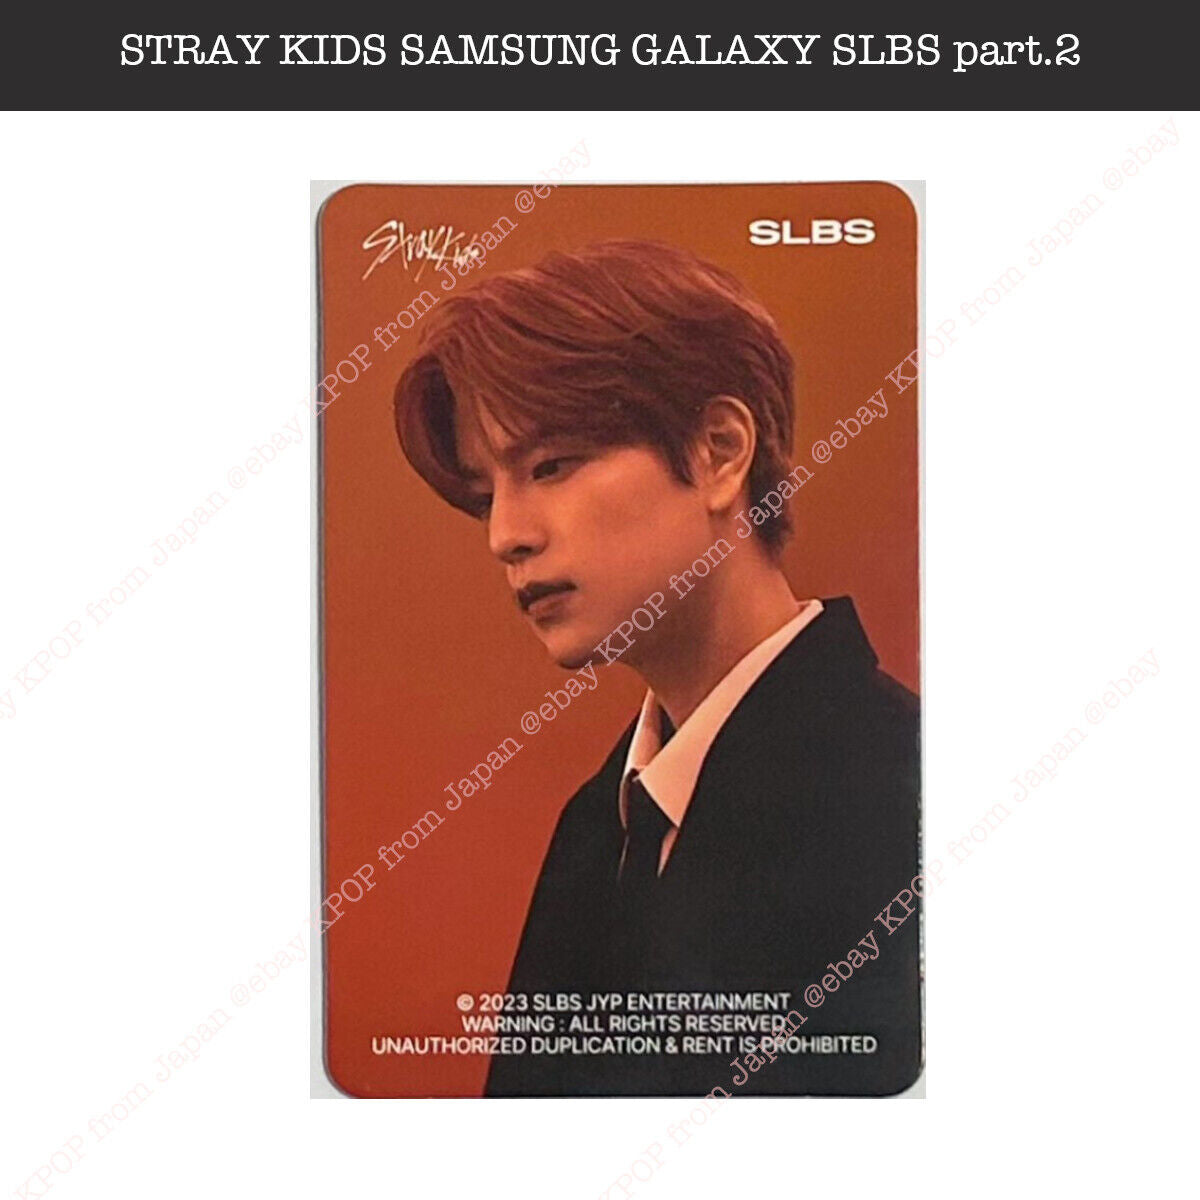 Stray kids SAMSUNG GALAXY SLBS part.2 Official Photocard